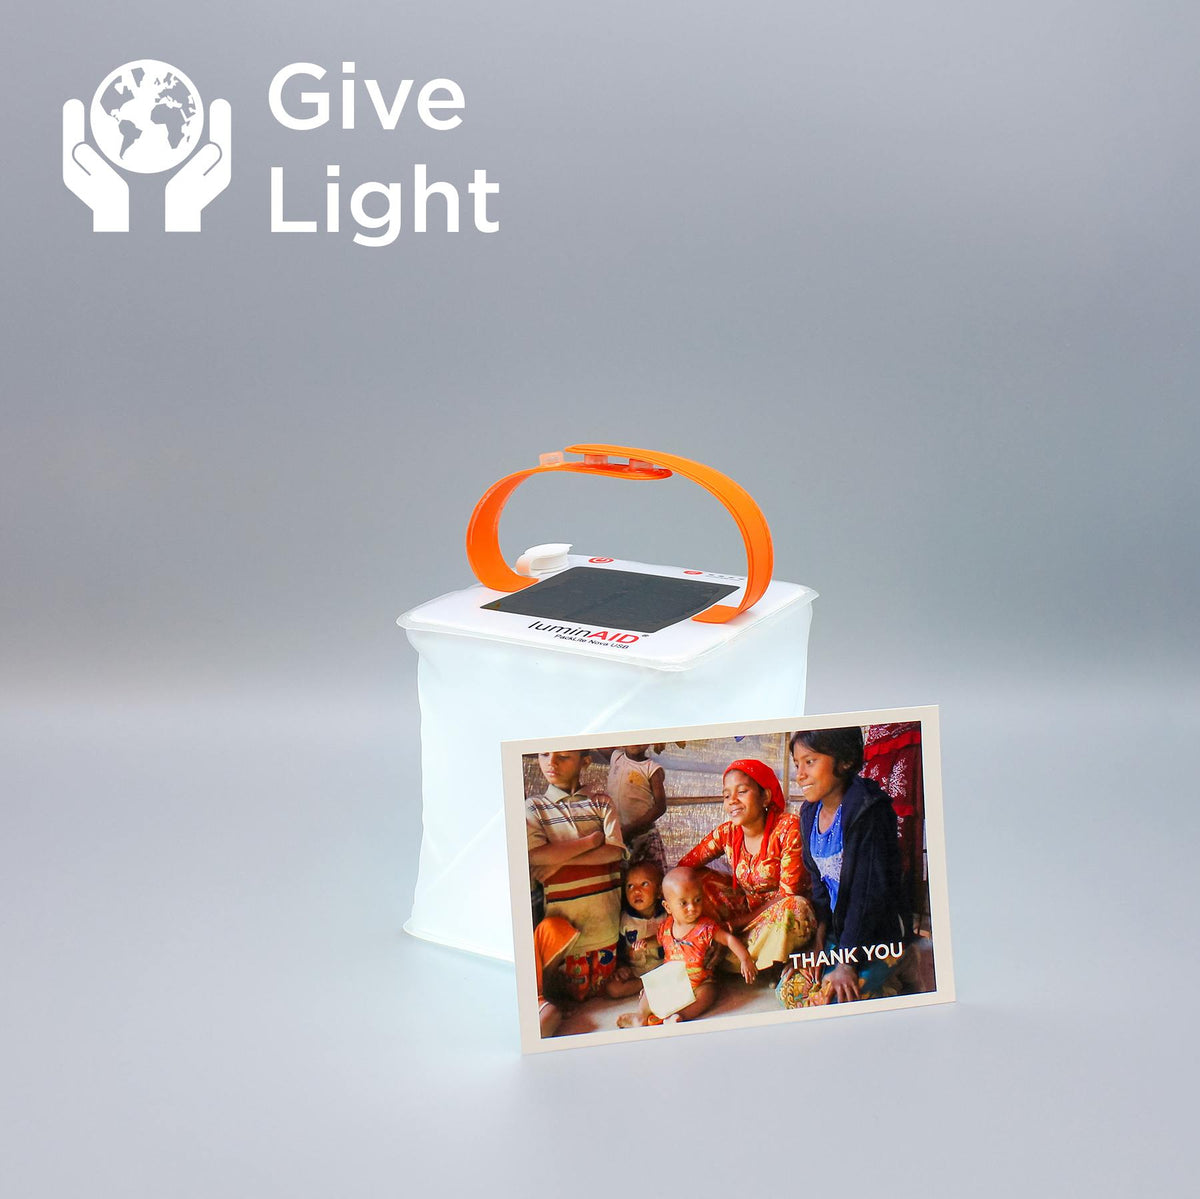 Give light, light with thank you card.